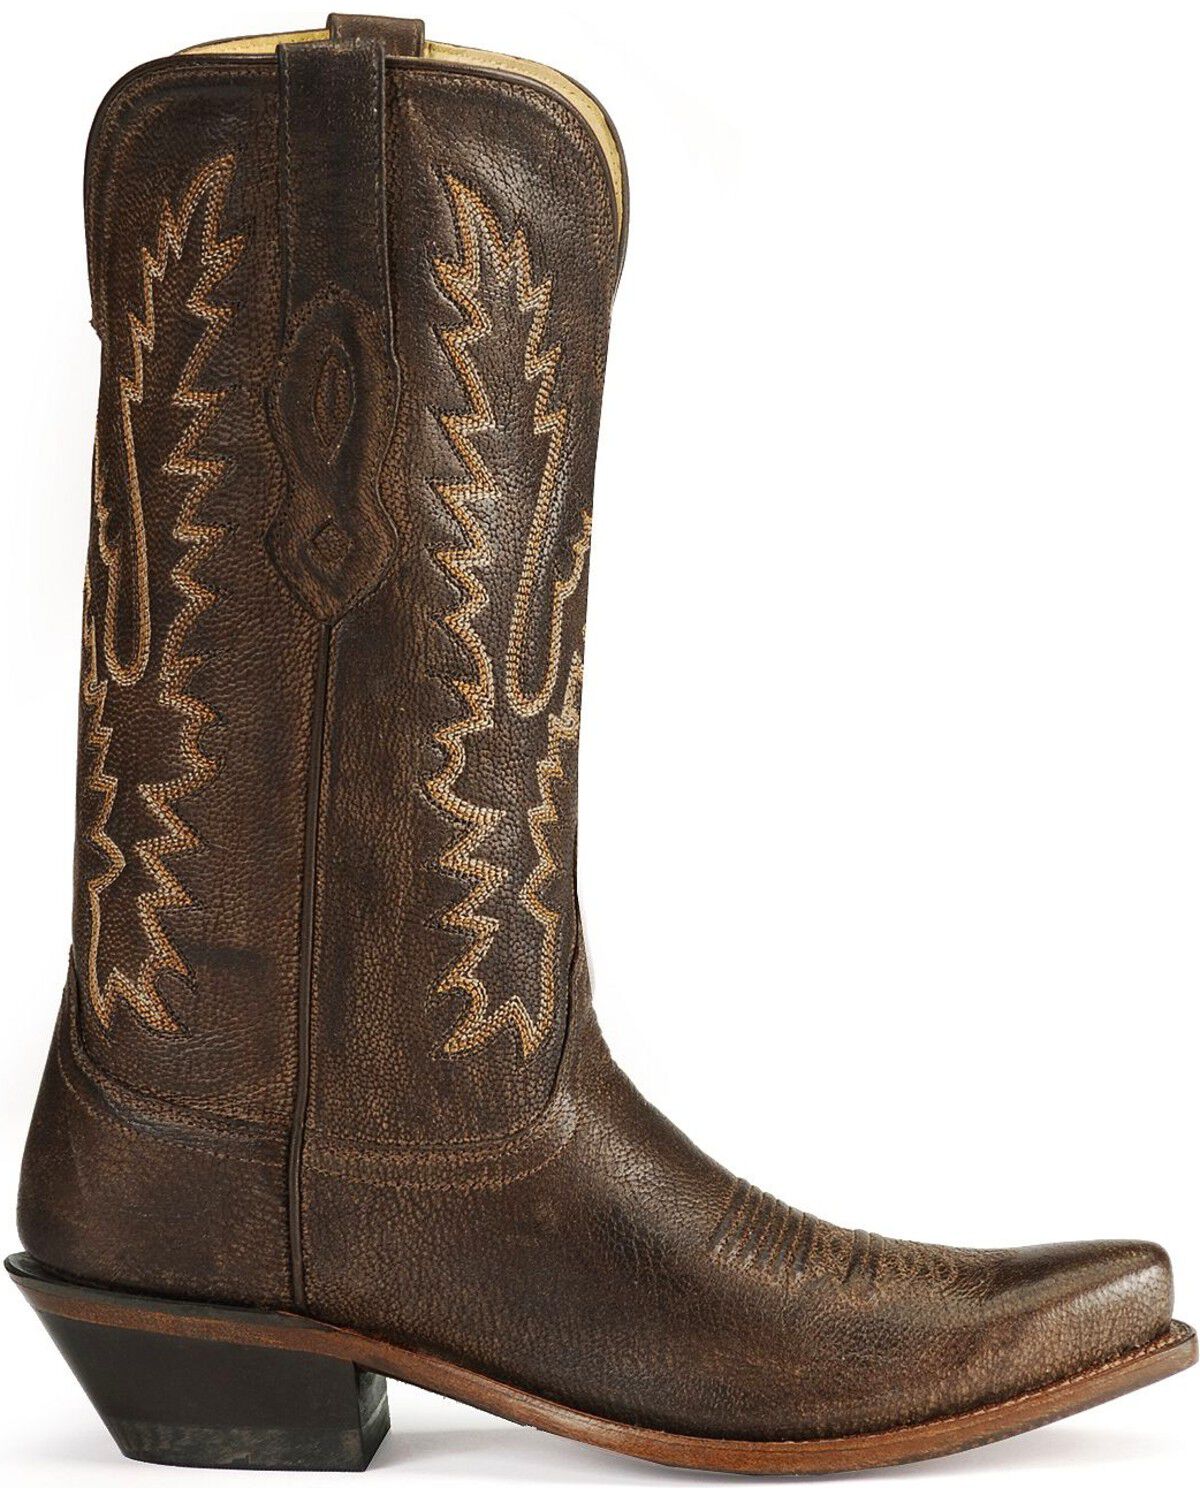 Old West Women's Fashion Western Boots 